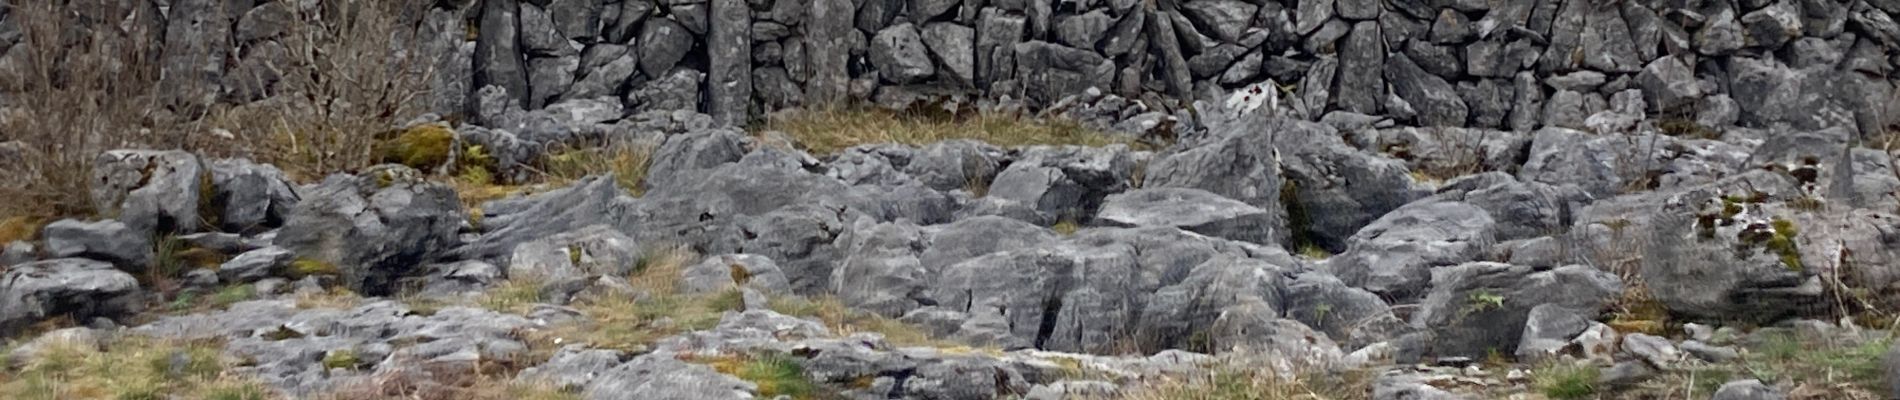 Tour Wandern West Clare Municipal District - Burren - the blue and white trains - Photo